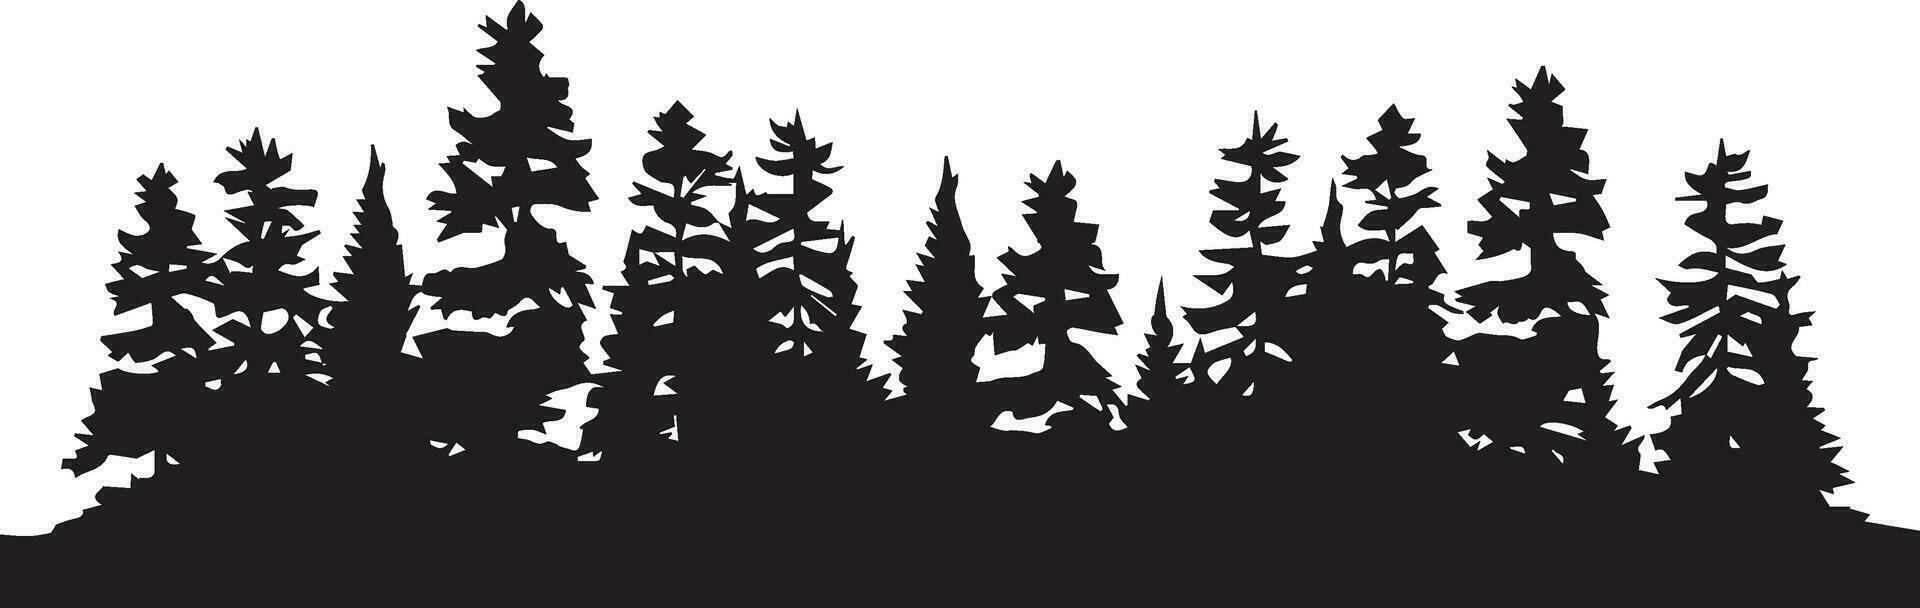 Forest Vector silhouette illustration 3